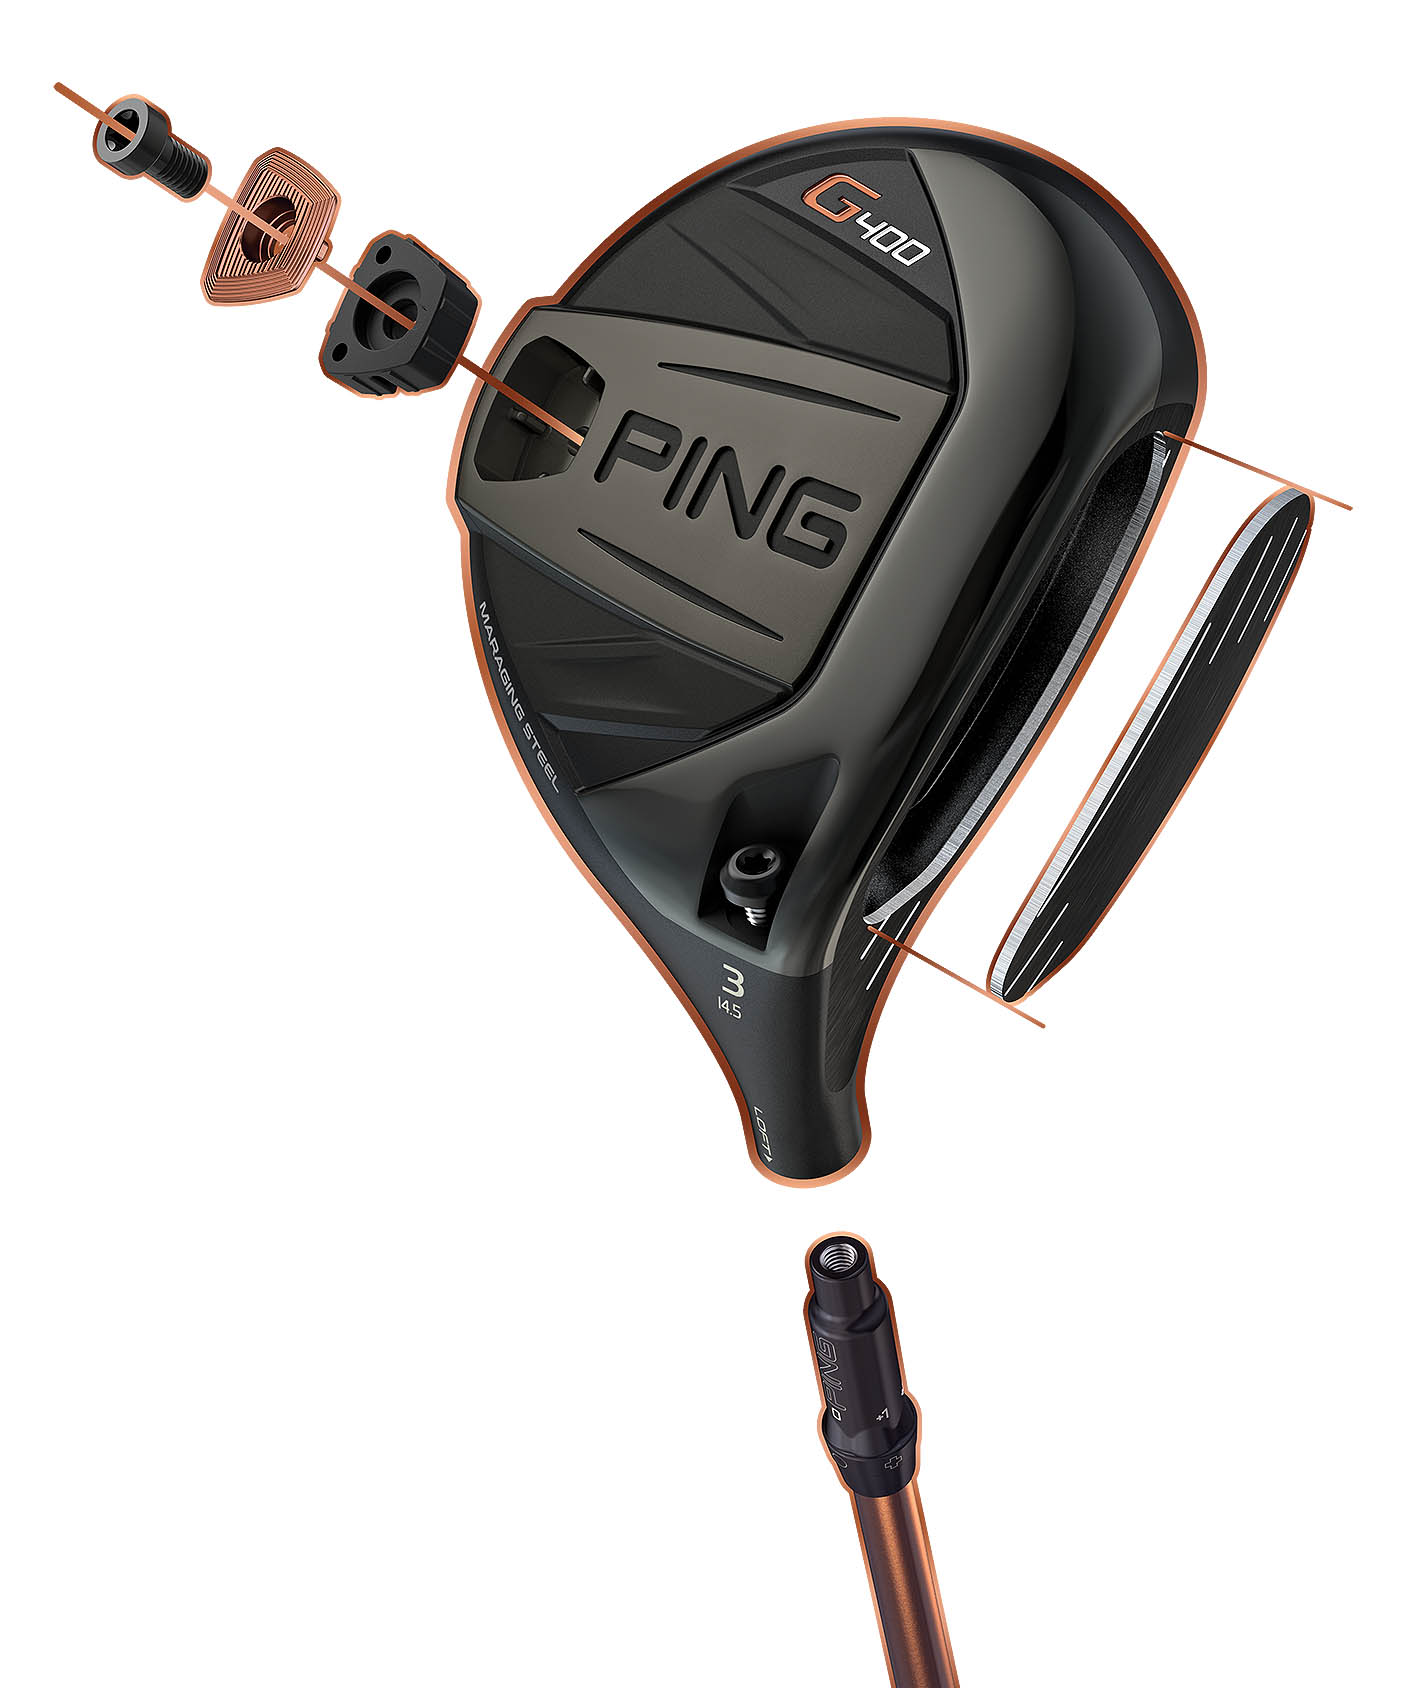 REVIEW: Ping G400 driver and woods - The GOLFTEC Scramble